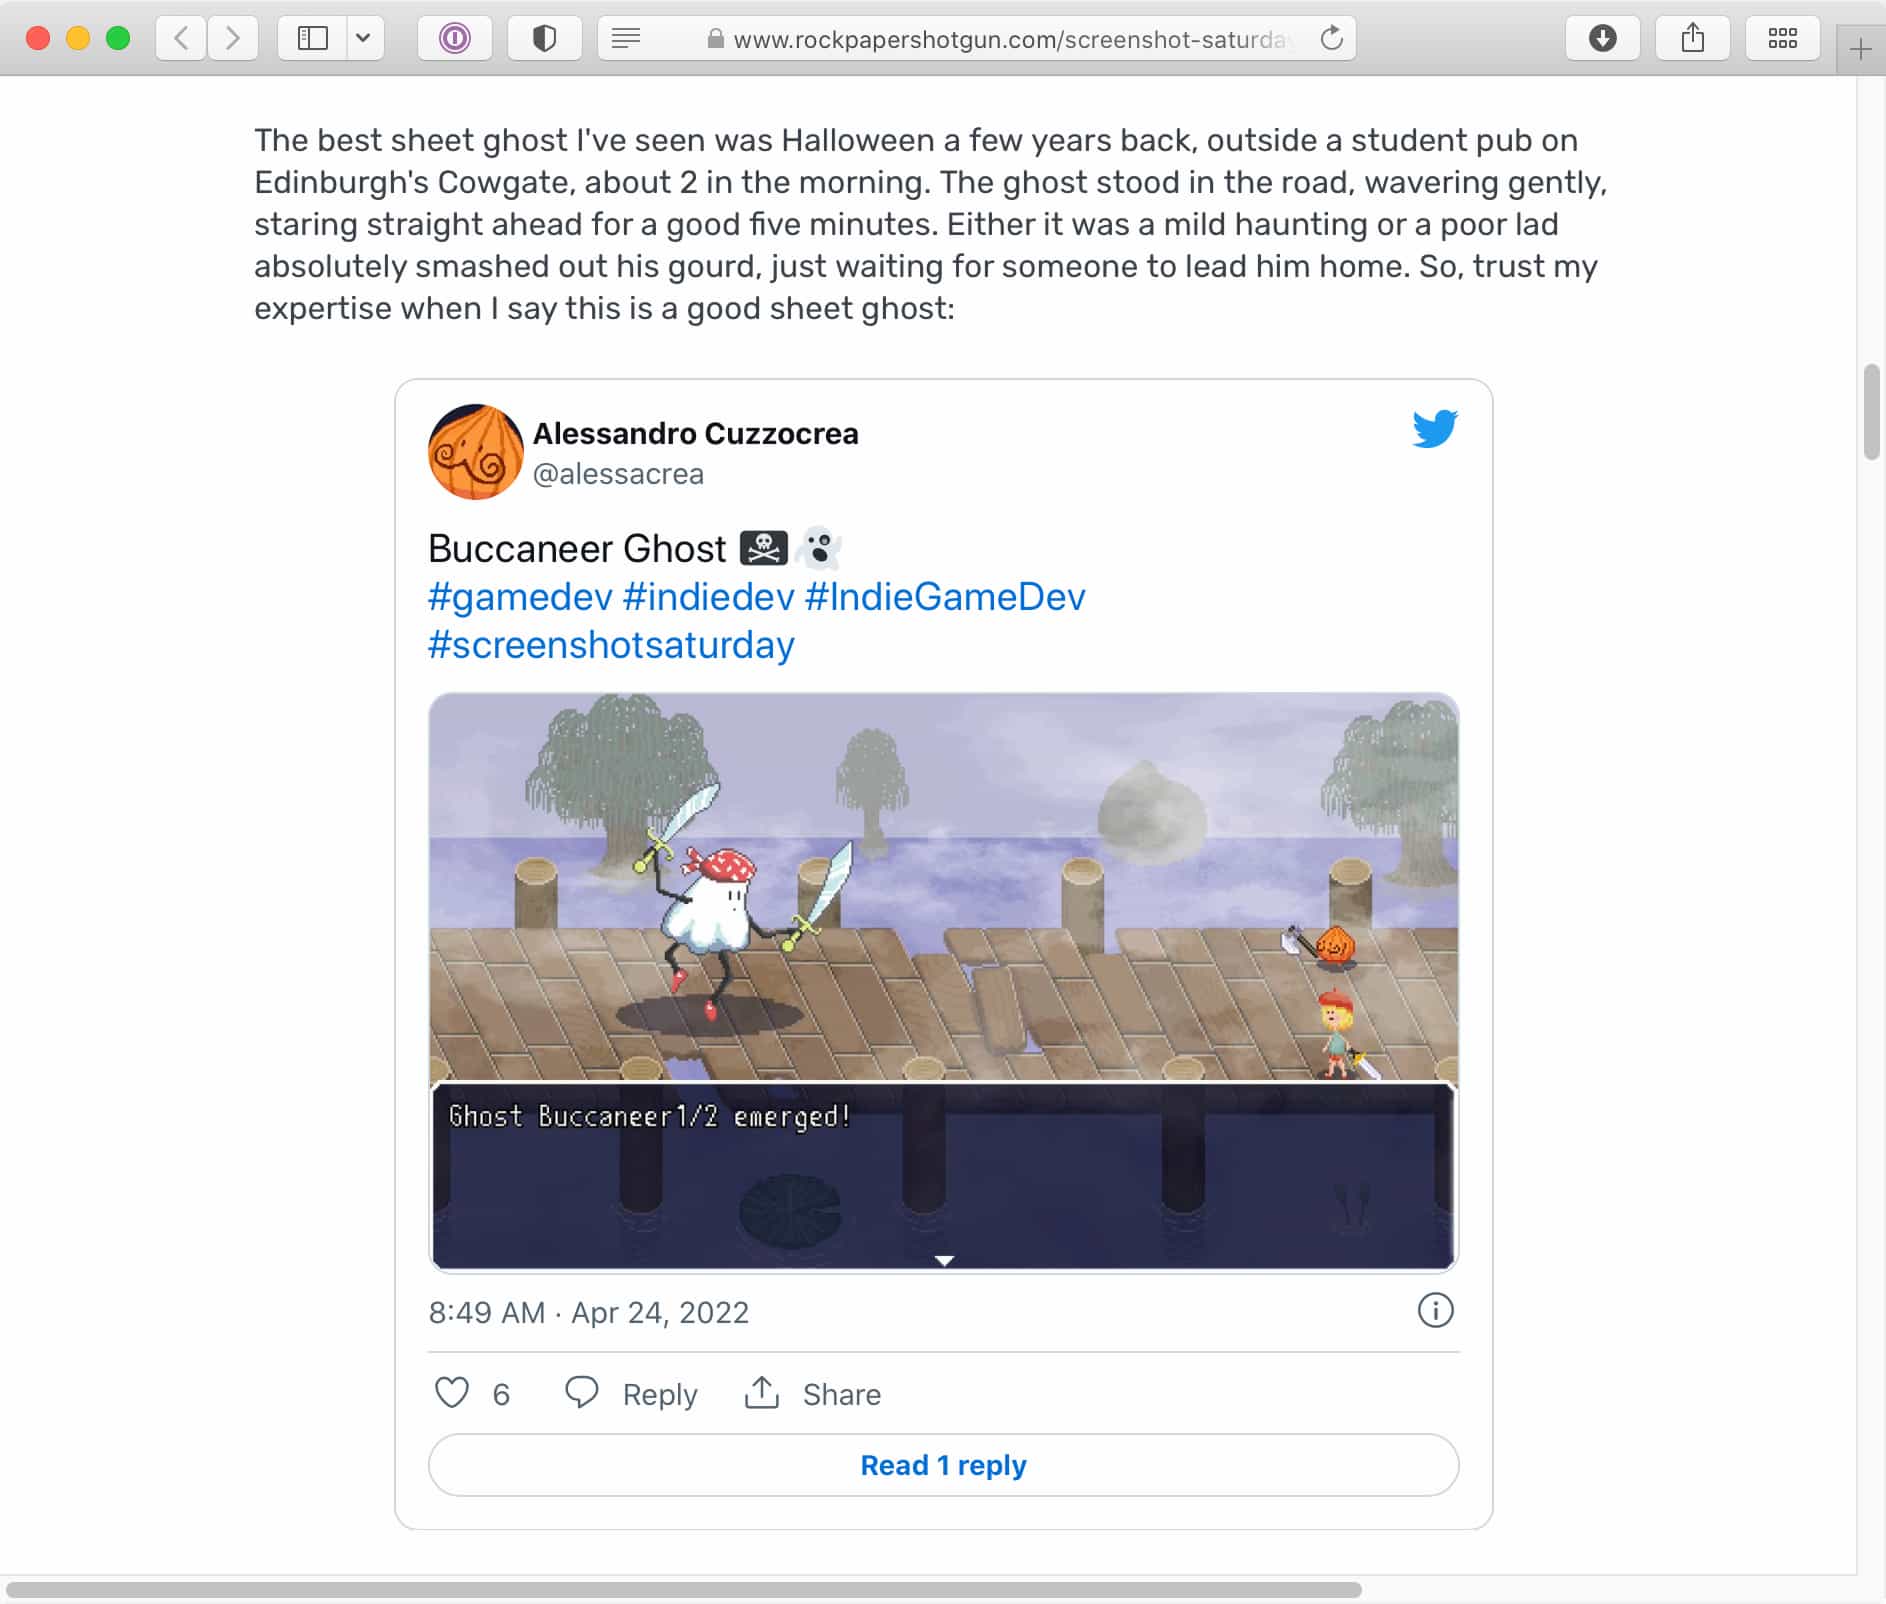 An embedded tweet from Alessandro Cuzzocrea (@alessacrea) featured on Rock, Paper, Shotgun (RPS) showcasing a screenshot from rpg-2021-b